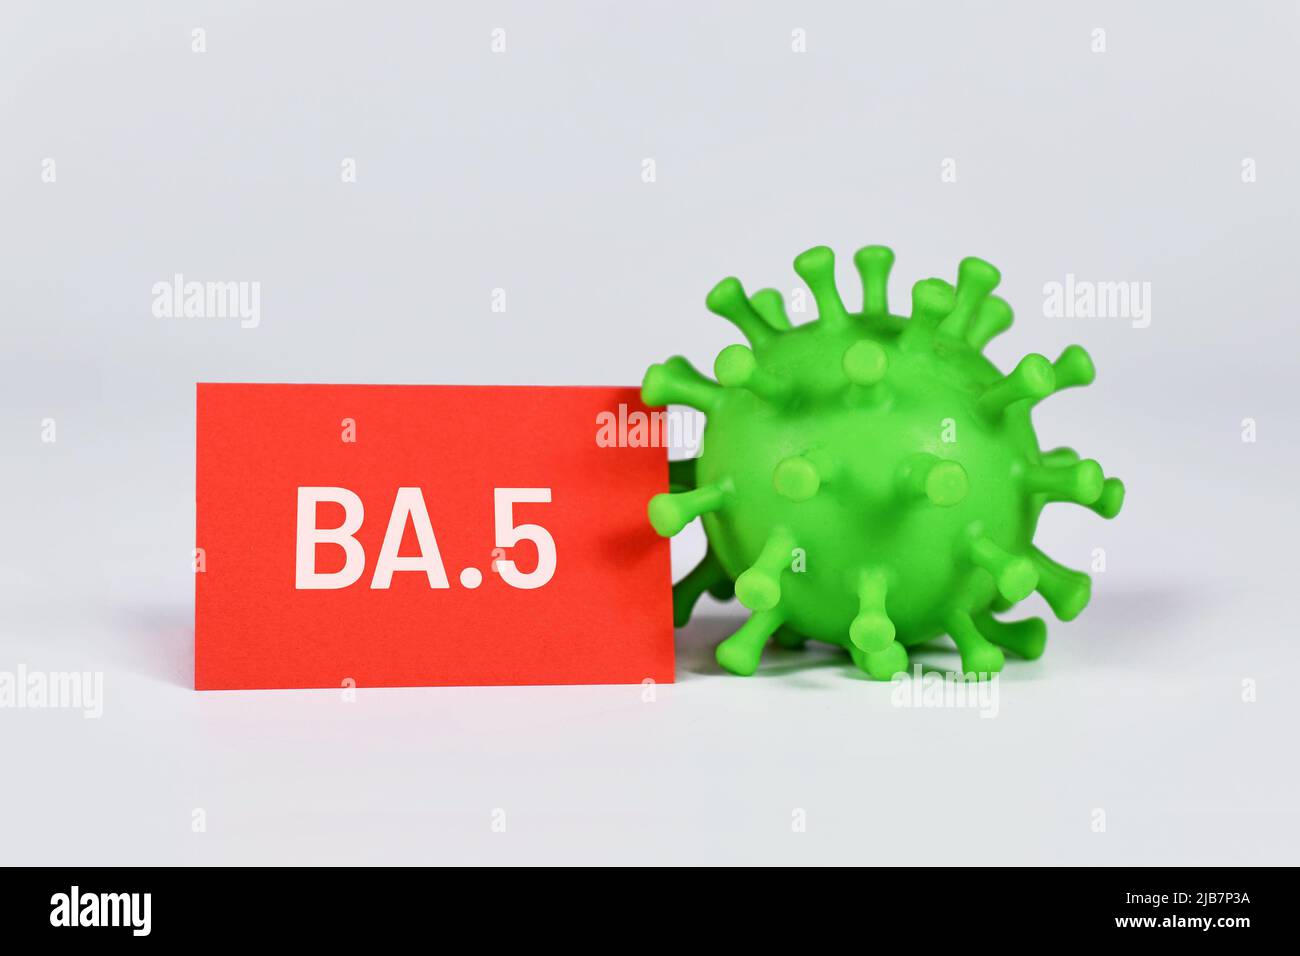 Omicron subvariant BA.5 virus mutation concept with virus model and text Stock Photo